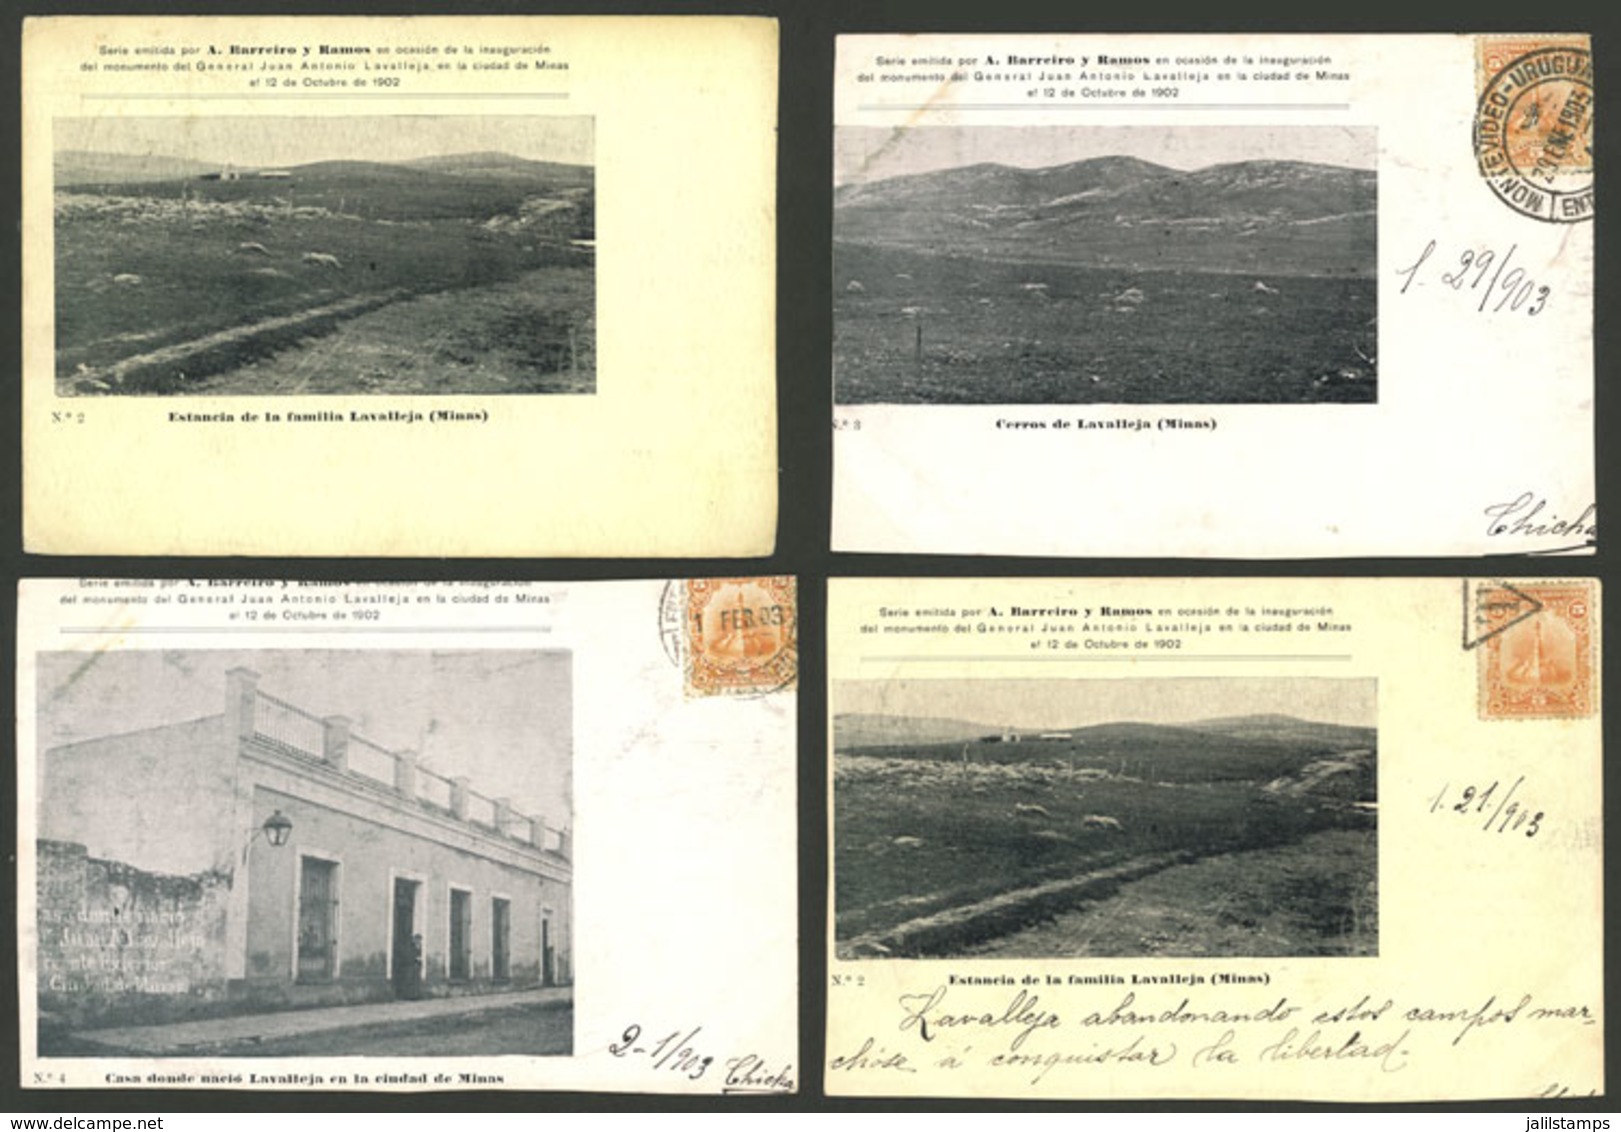 URUGUAY: Inauguration Of Monument To Lavalleja In Minas (1902), 9 Rare Postcards With Very Good Views, Several Trimmed,  - Uruguay